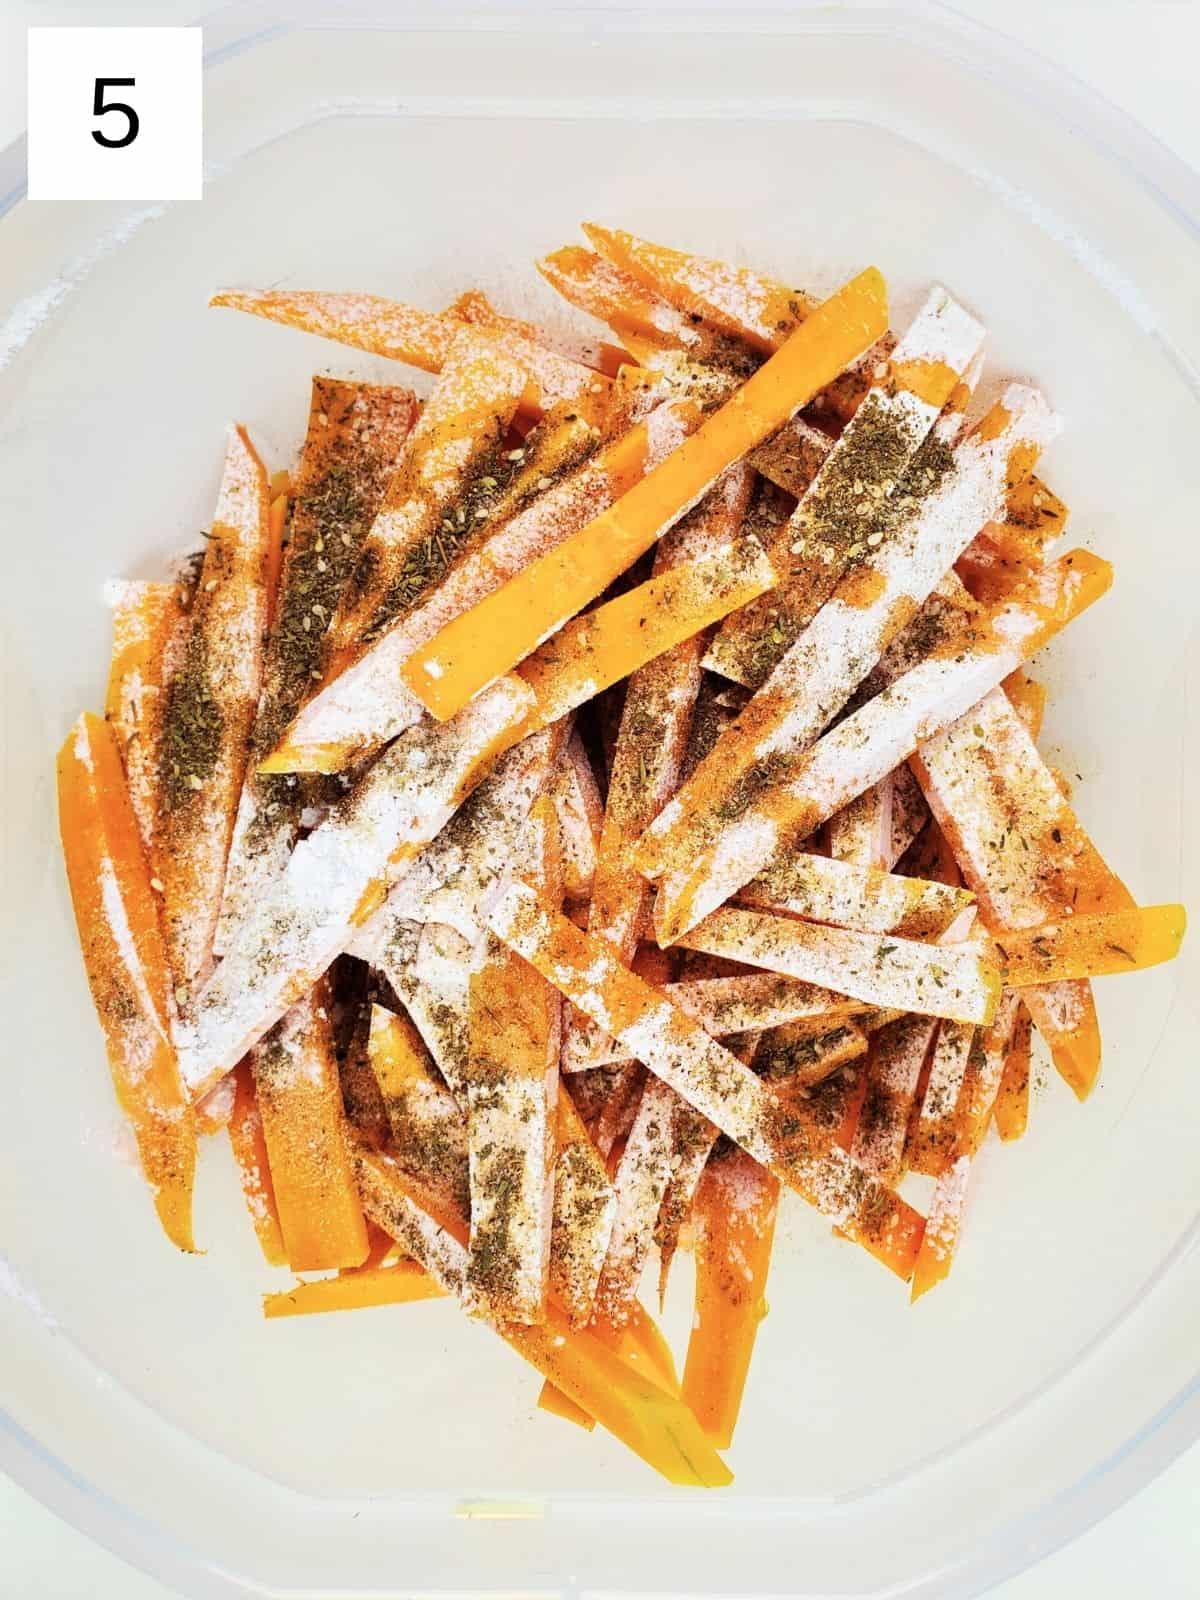 butternut squash slices, topped with seasonings including za'atar, garlic powder, sea salt, tapioca starch, and olive oil, in a bowl.